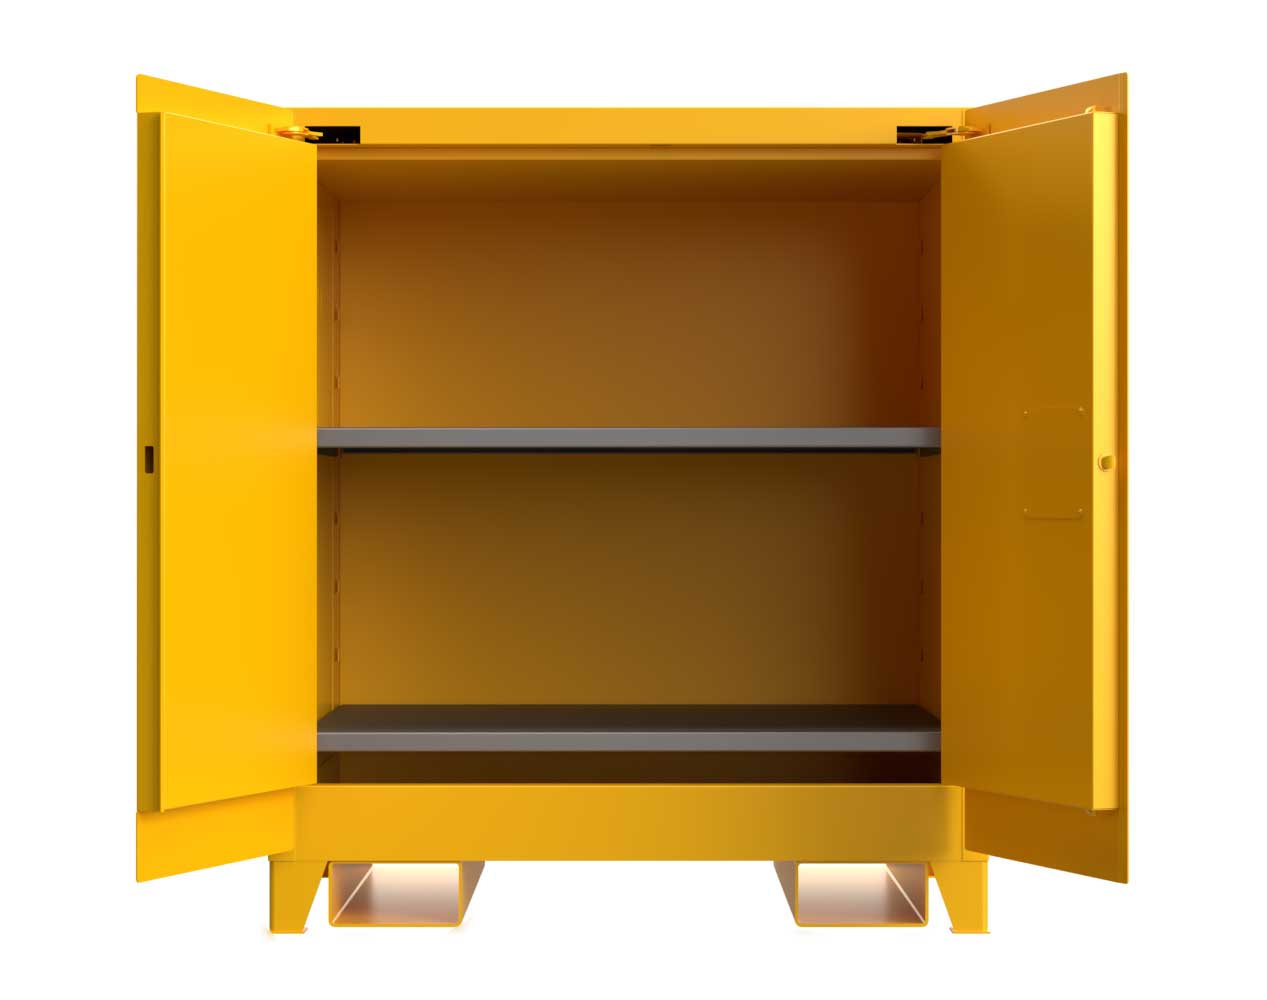 Extra Heavy Duty 14 GA 60 Gallon Flammable Safety Cabinet with Self-Closing Doors, 2 Shelves, Forklift Pockets - 43 In. W x 34 In. D x 49 In. H